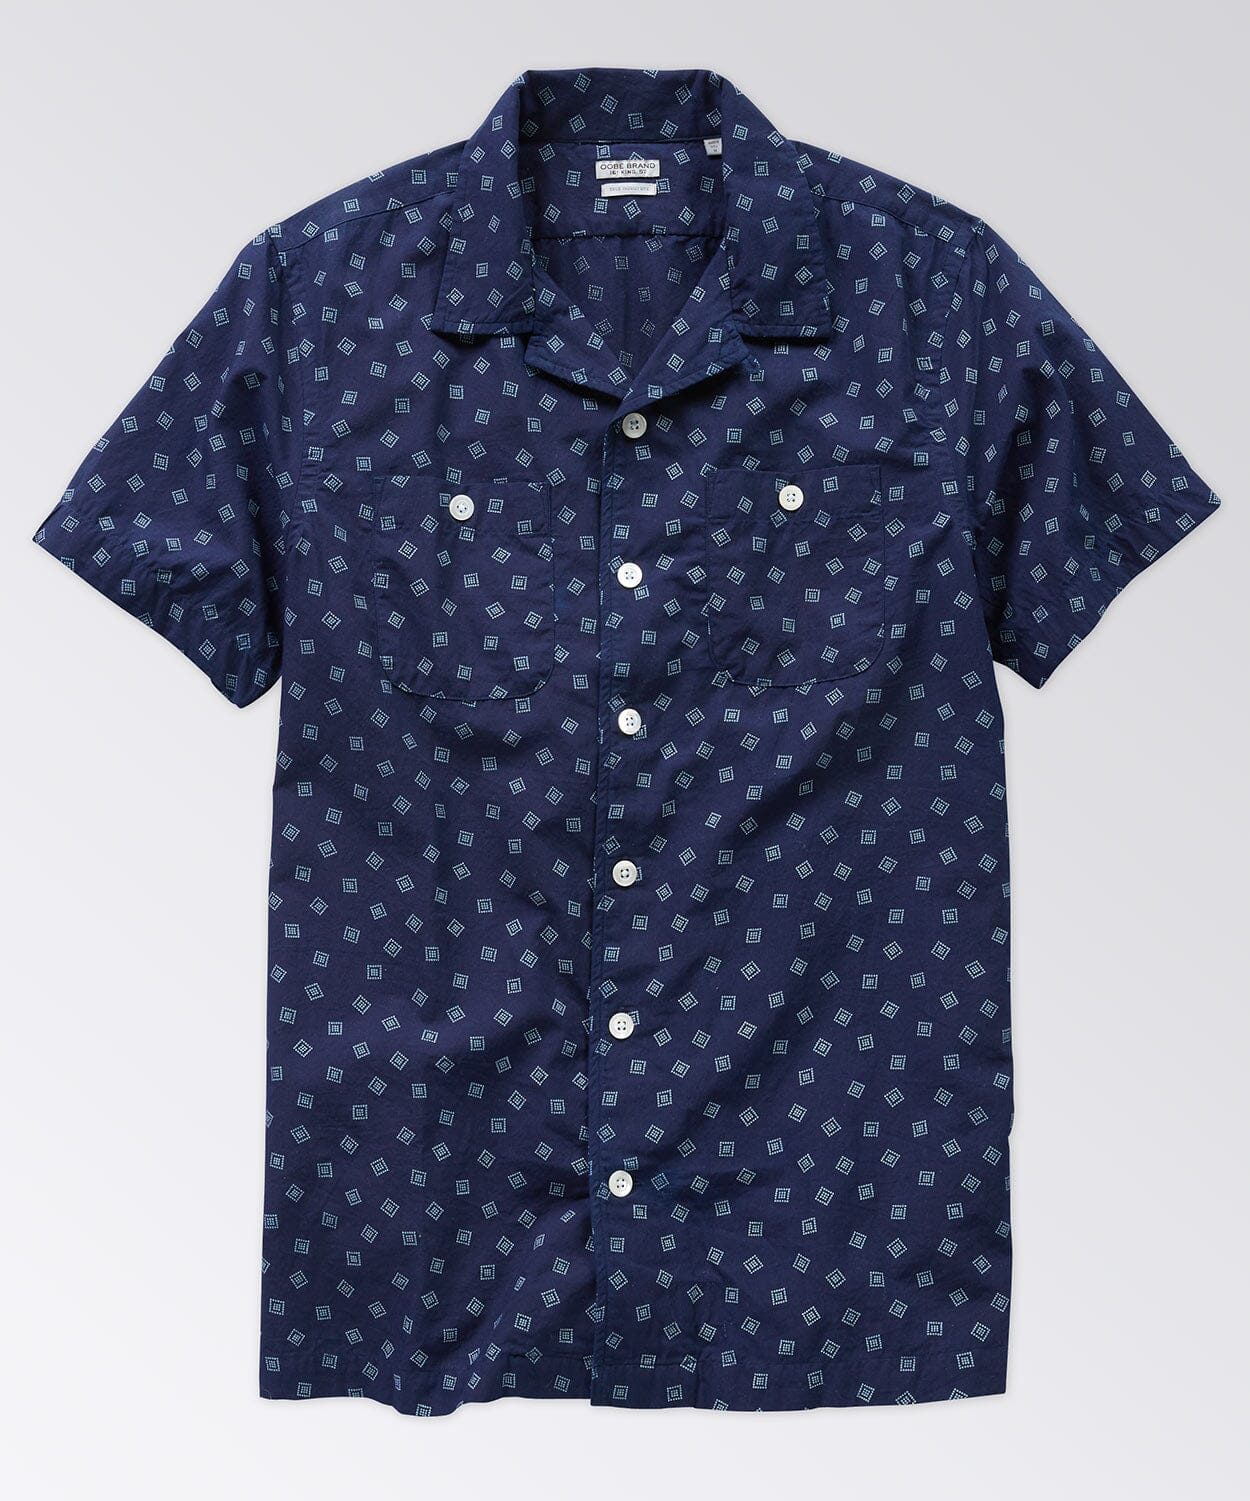 Elcott Printed Shirt Button Downs OOBE BRAND Indigo Dotted Squares S 